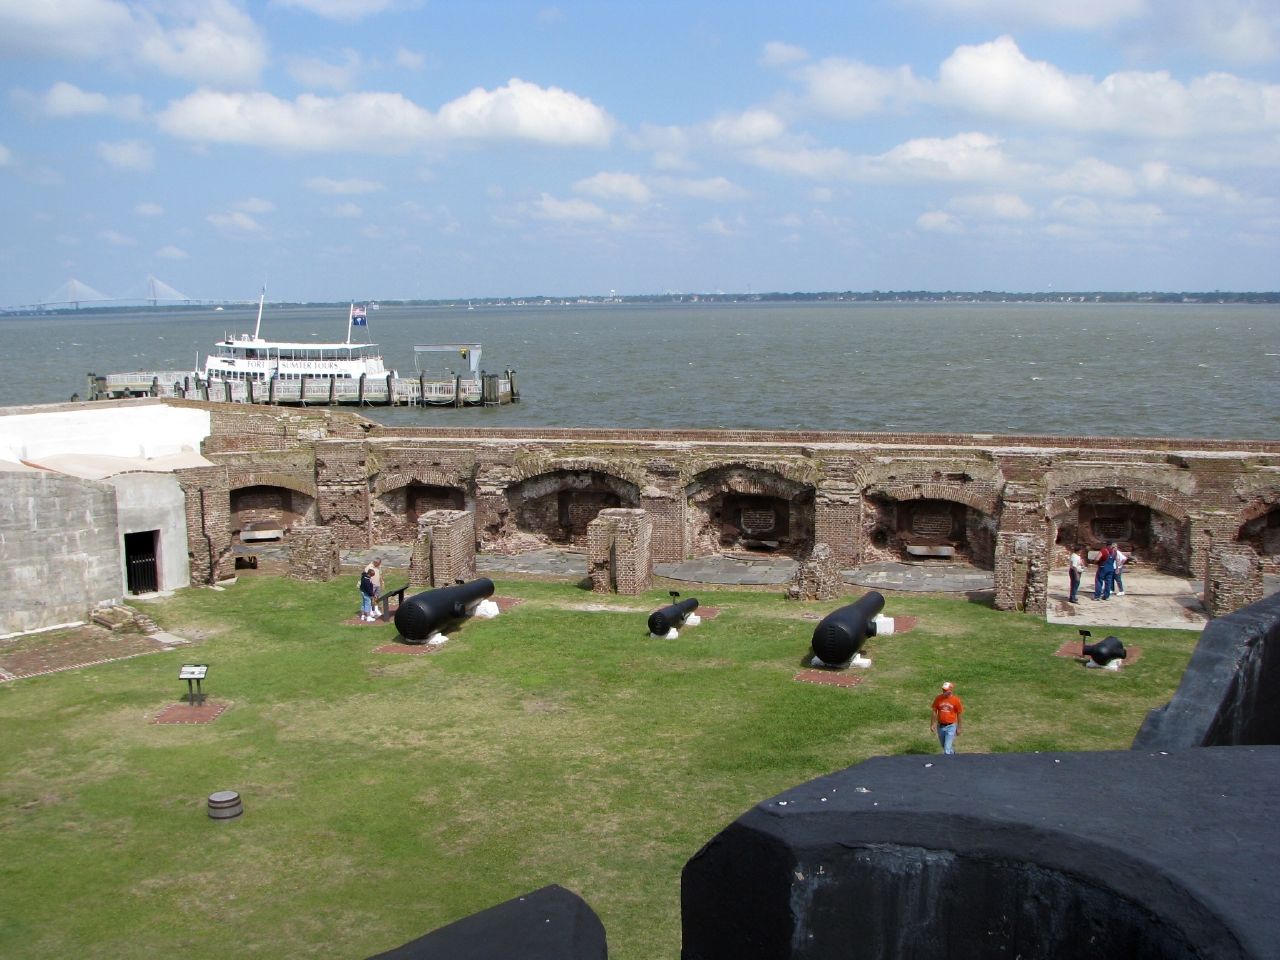 Inside Fort Sumter. Photo by howderfamily.com